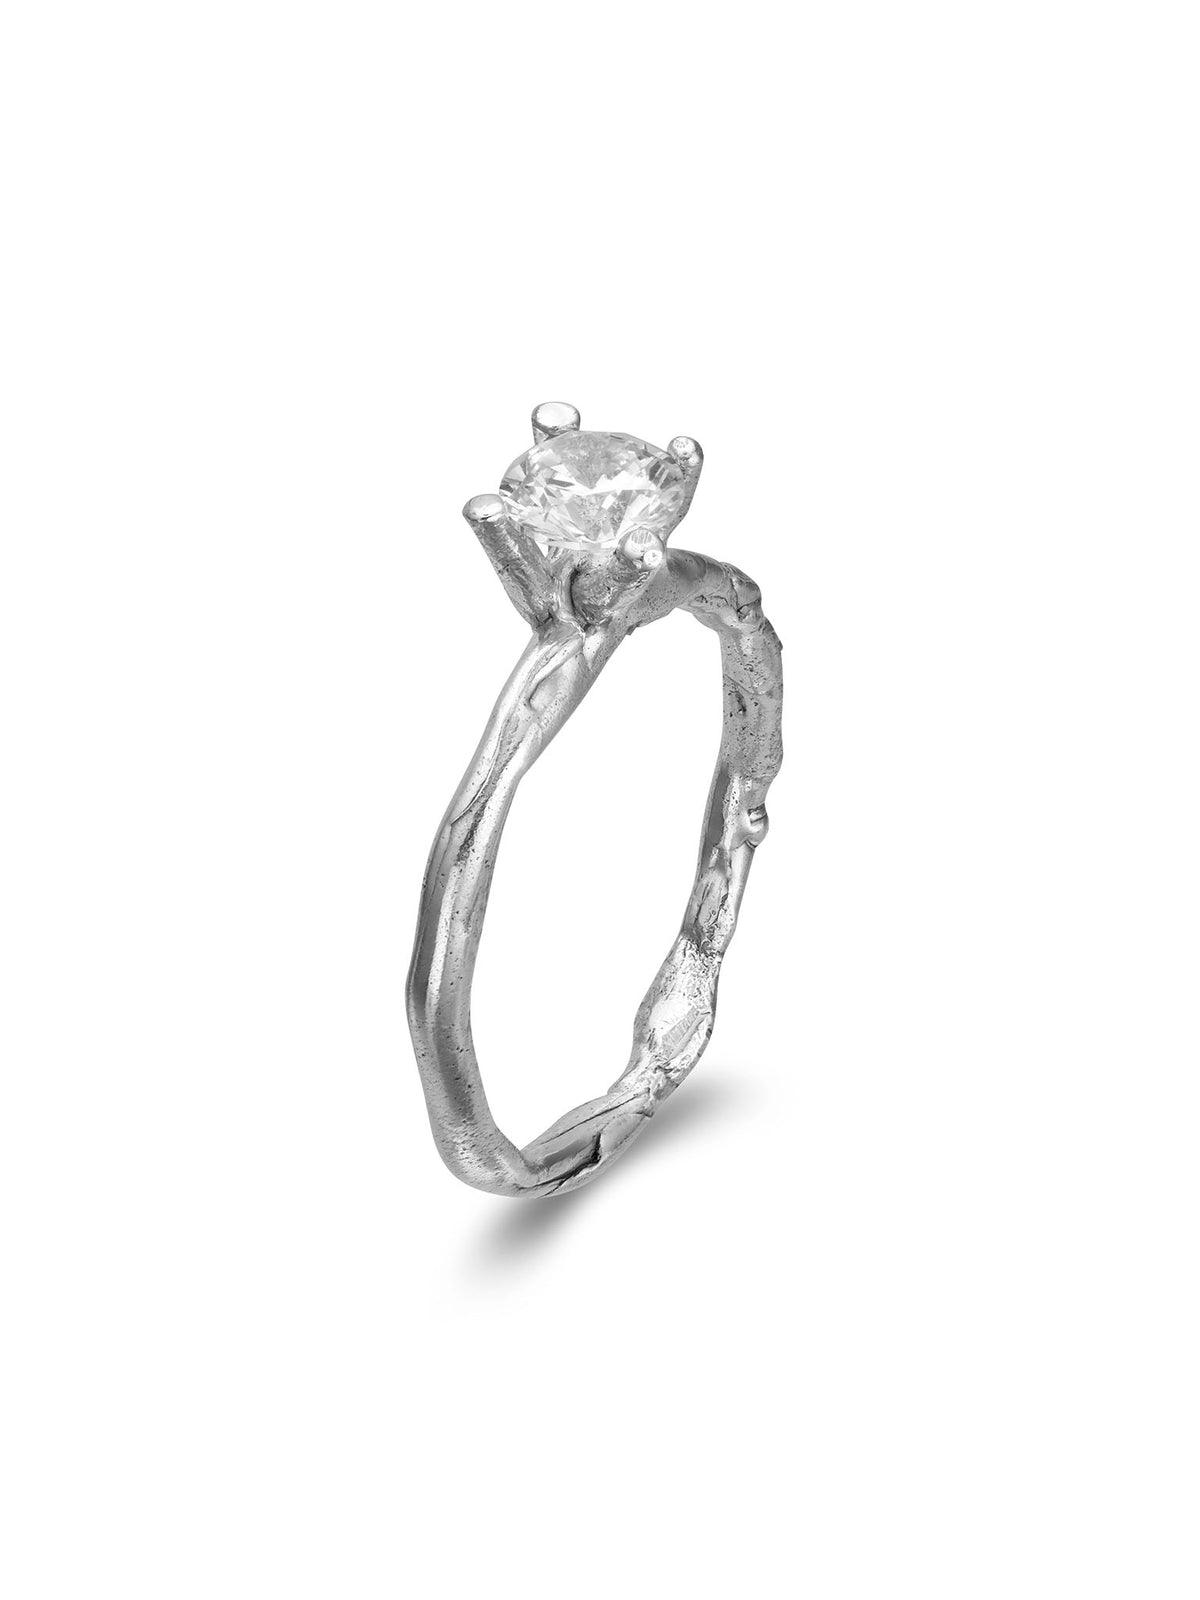 Everness Engagement Ring / White Gold